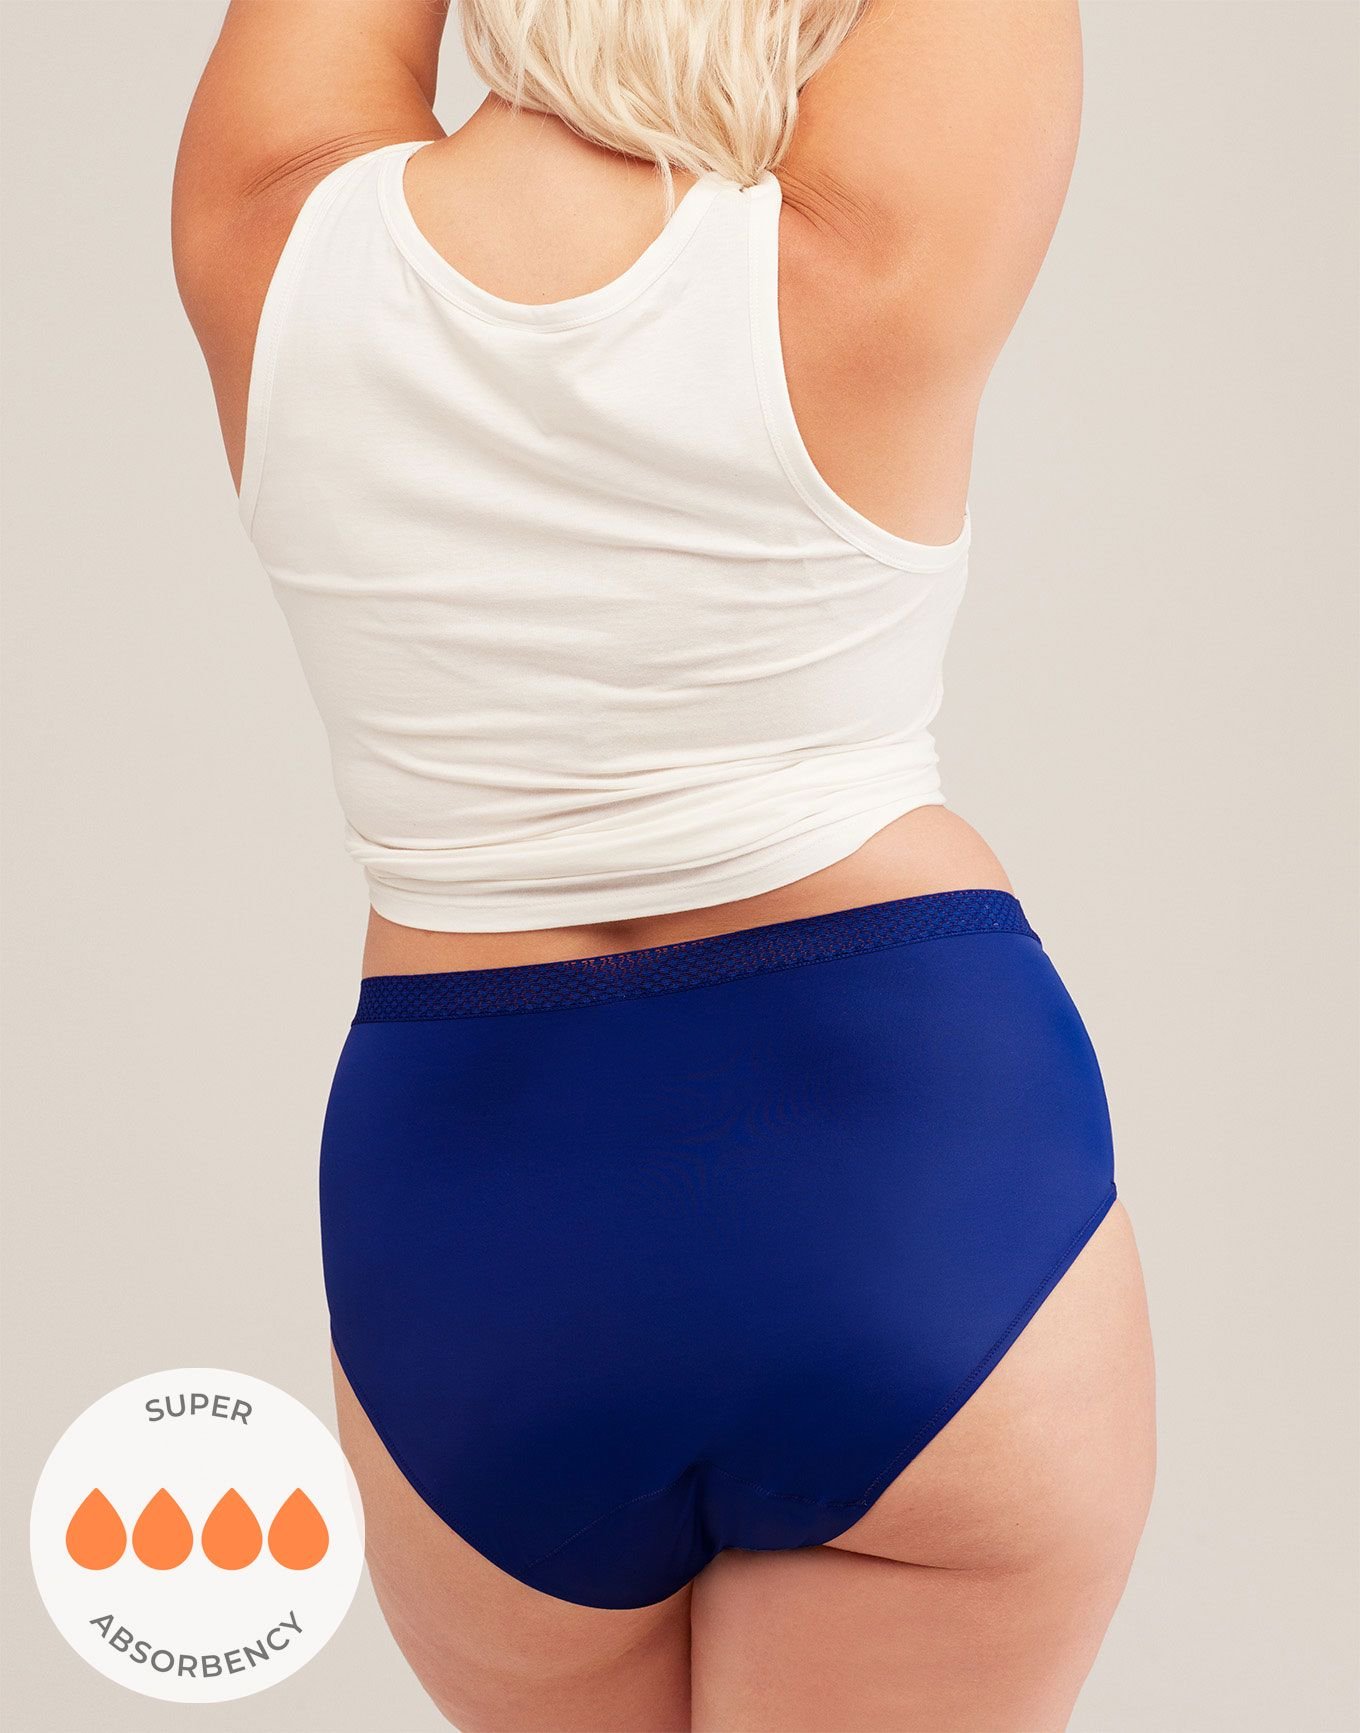 High End Mid Waist Panty: Set With Shaping Body, Plus Size Cotton Briefs  And Shorts For A Slimmer Look From Blueberry15, $14.9